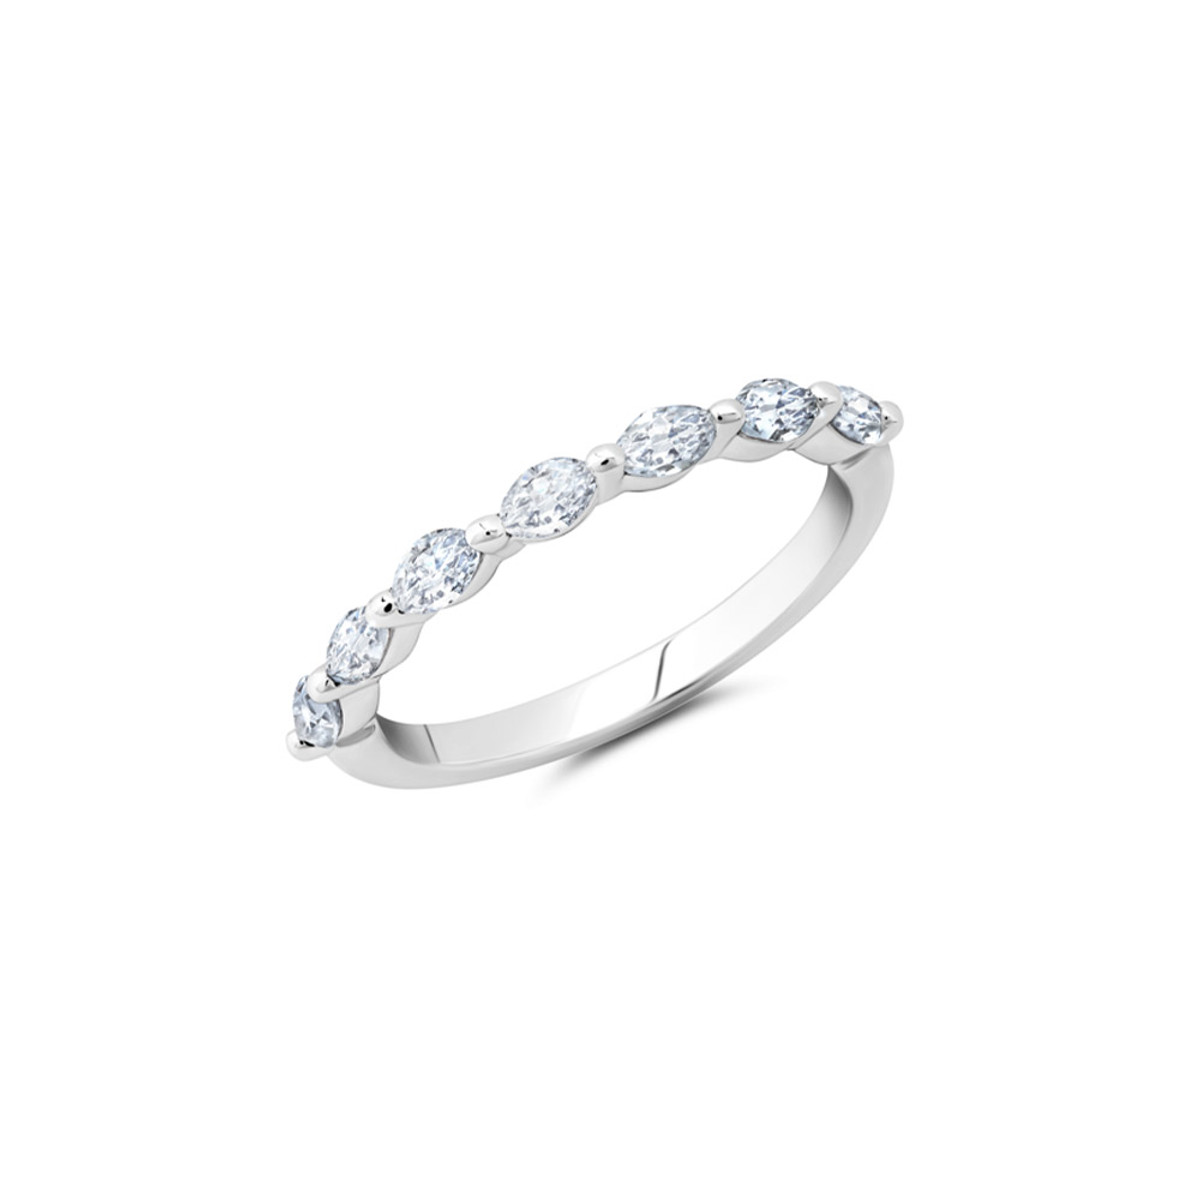 Peter Storm 14K White Gold Marquise Diamond Band-39060 Product Image